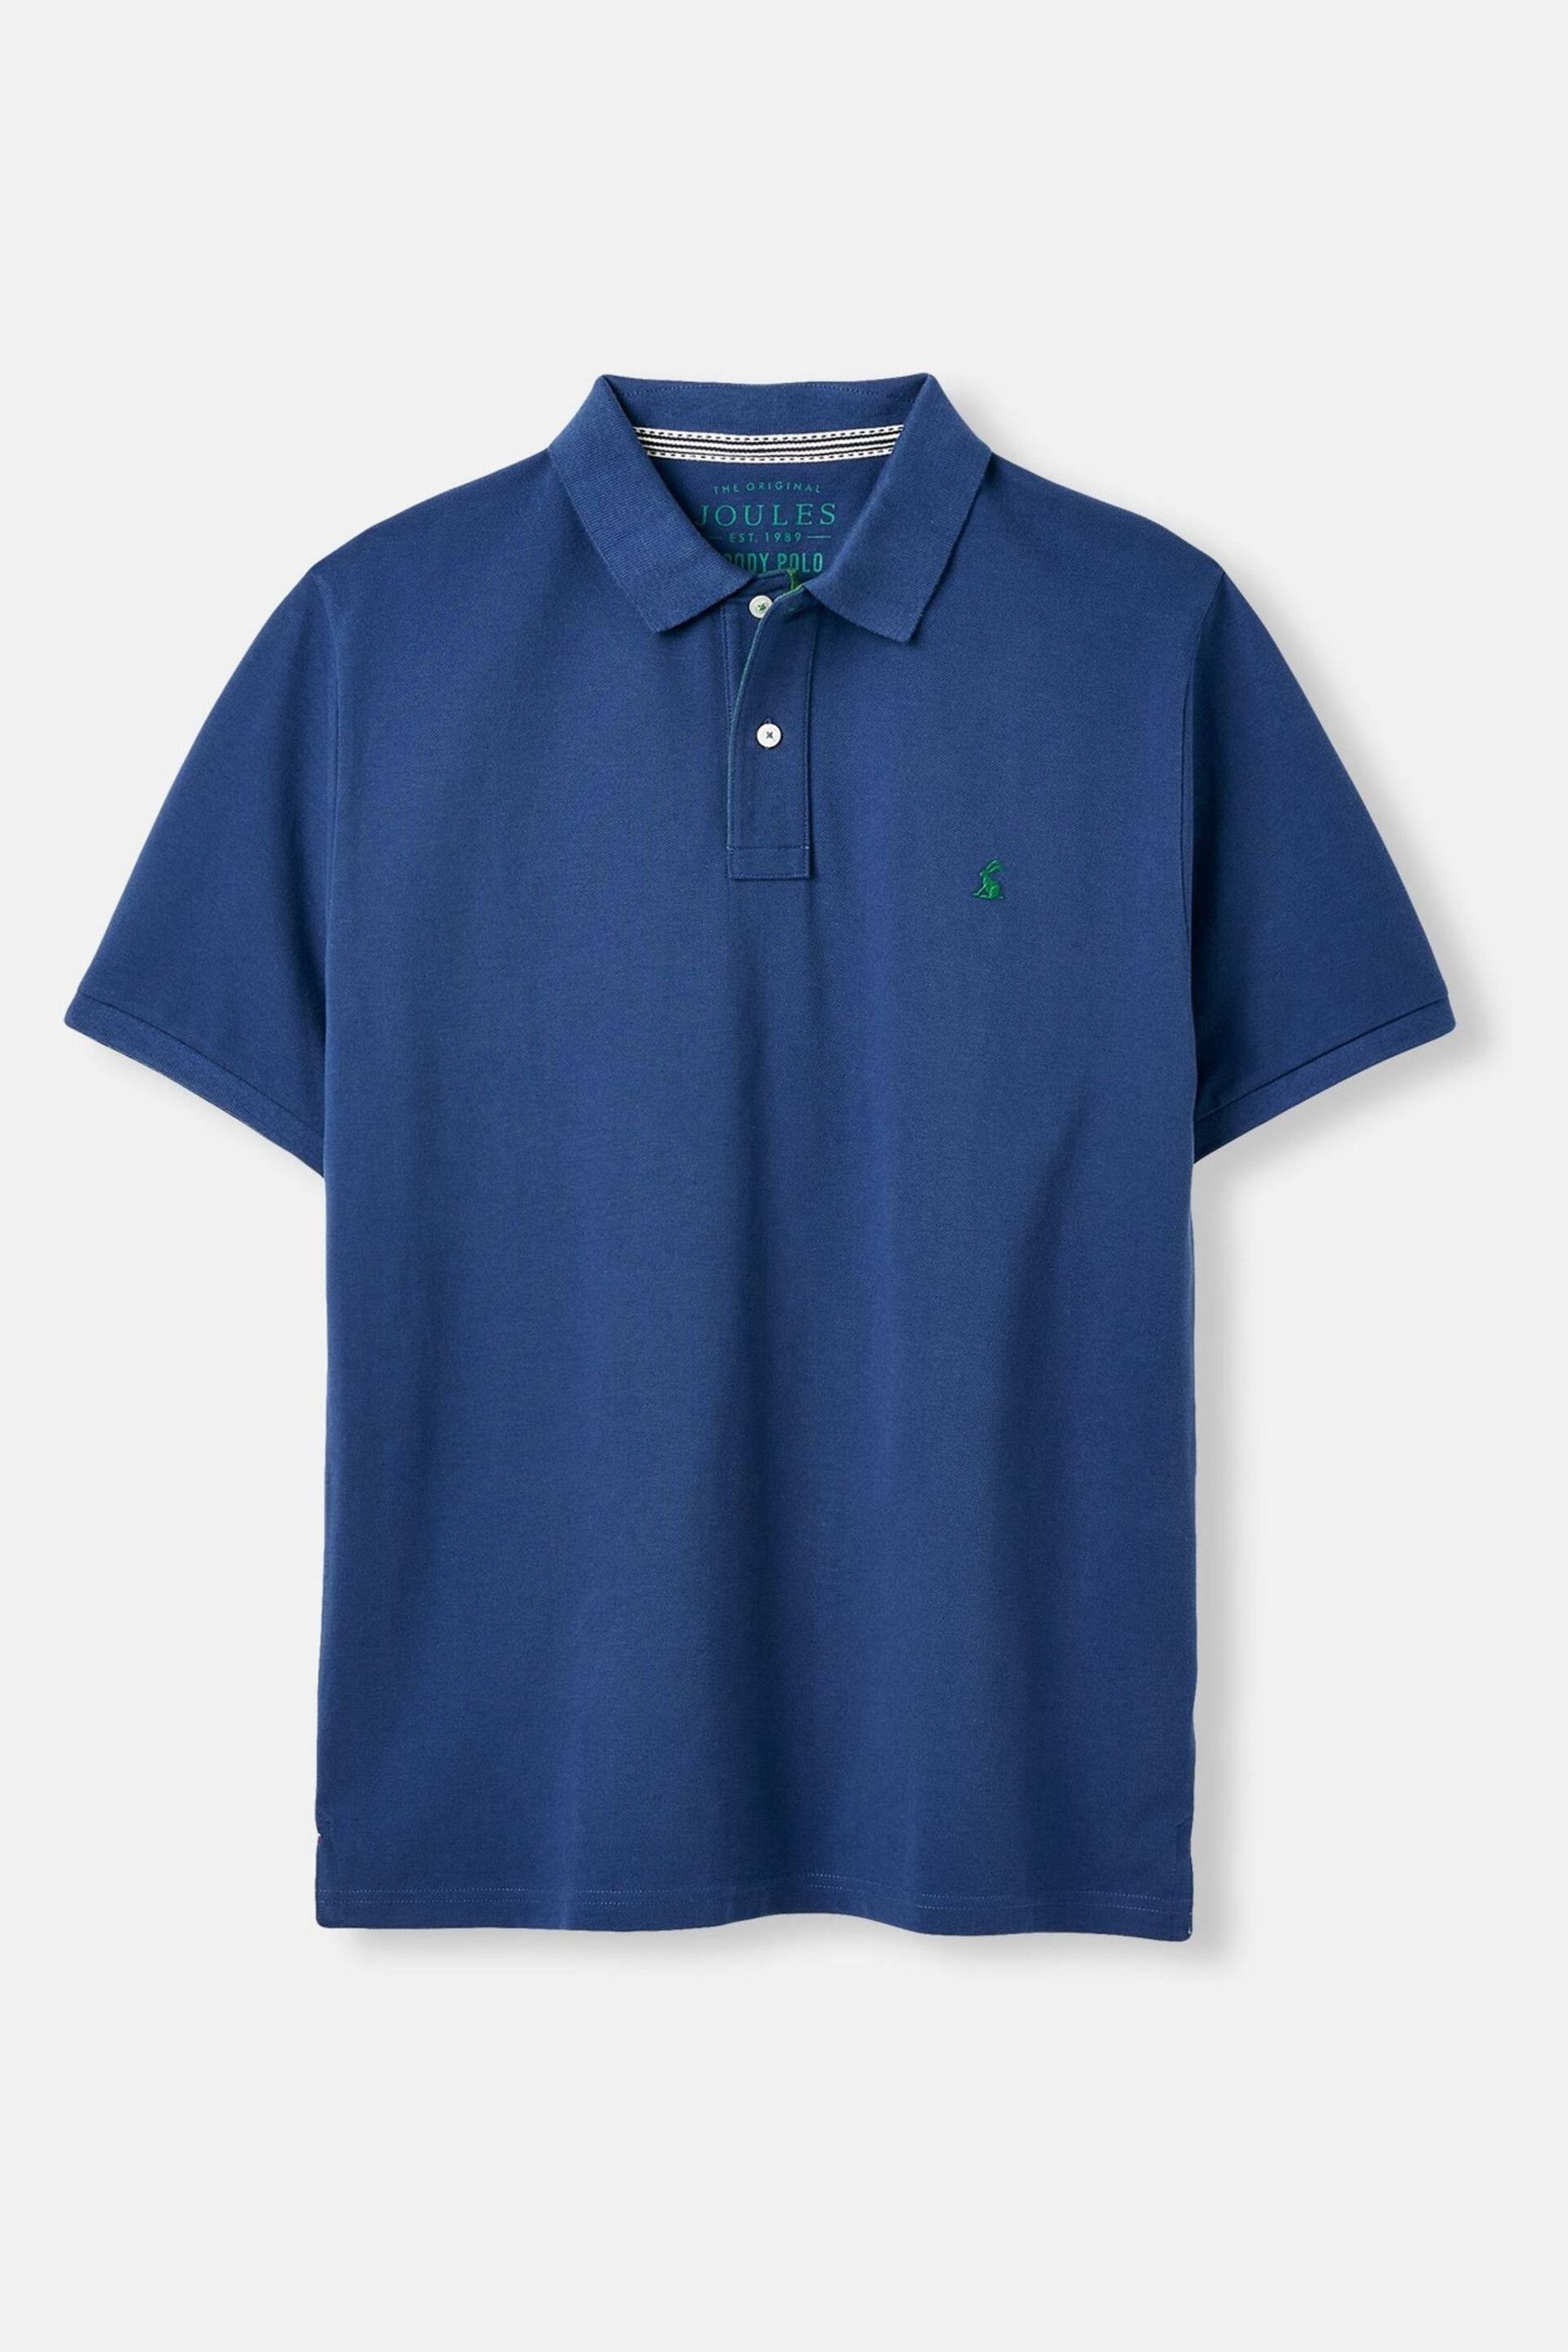 Joules Woody Blue Cotton Polo Shirt - Image 5 of 5